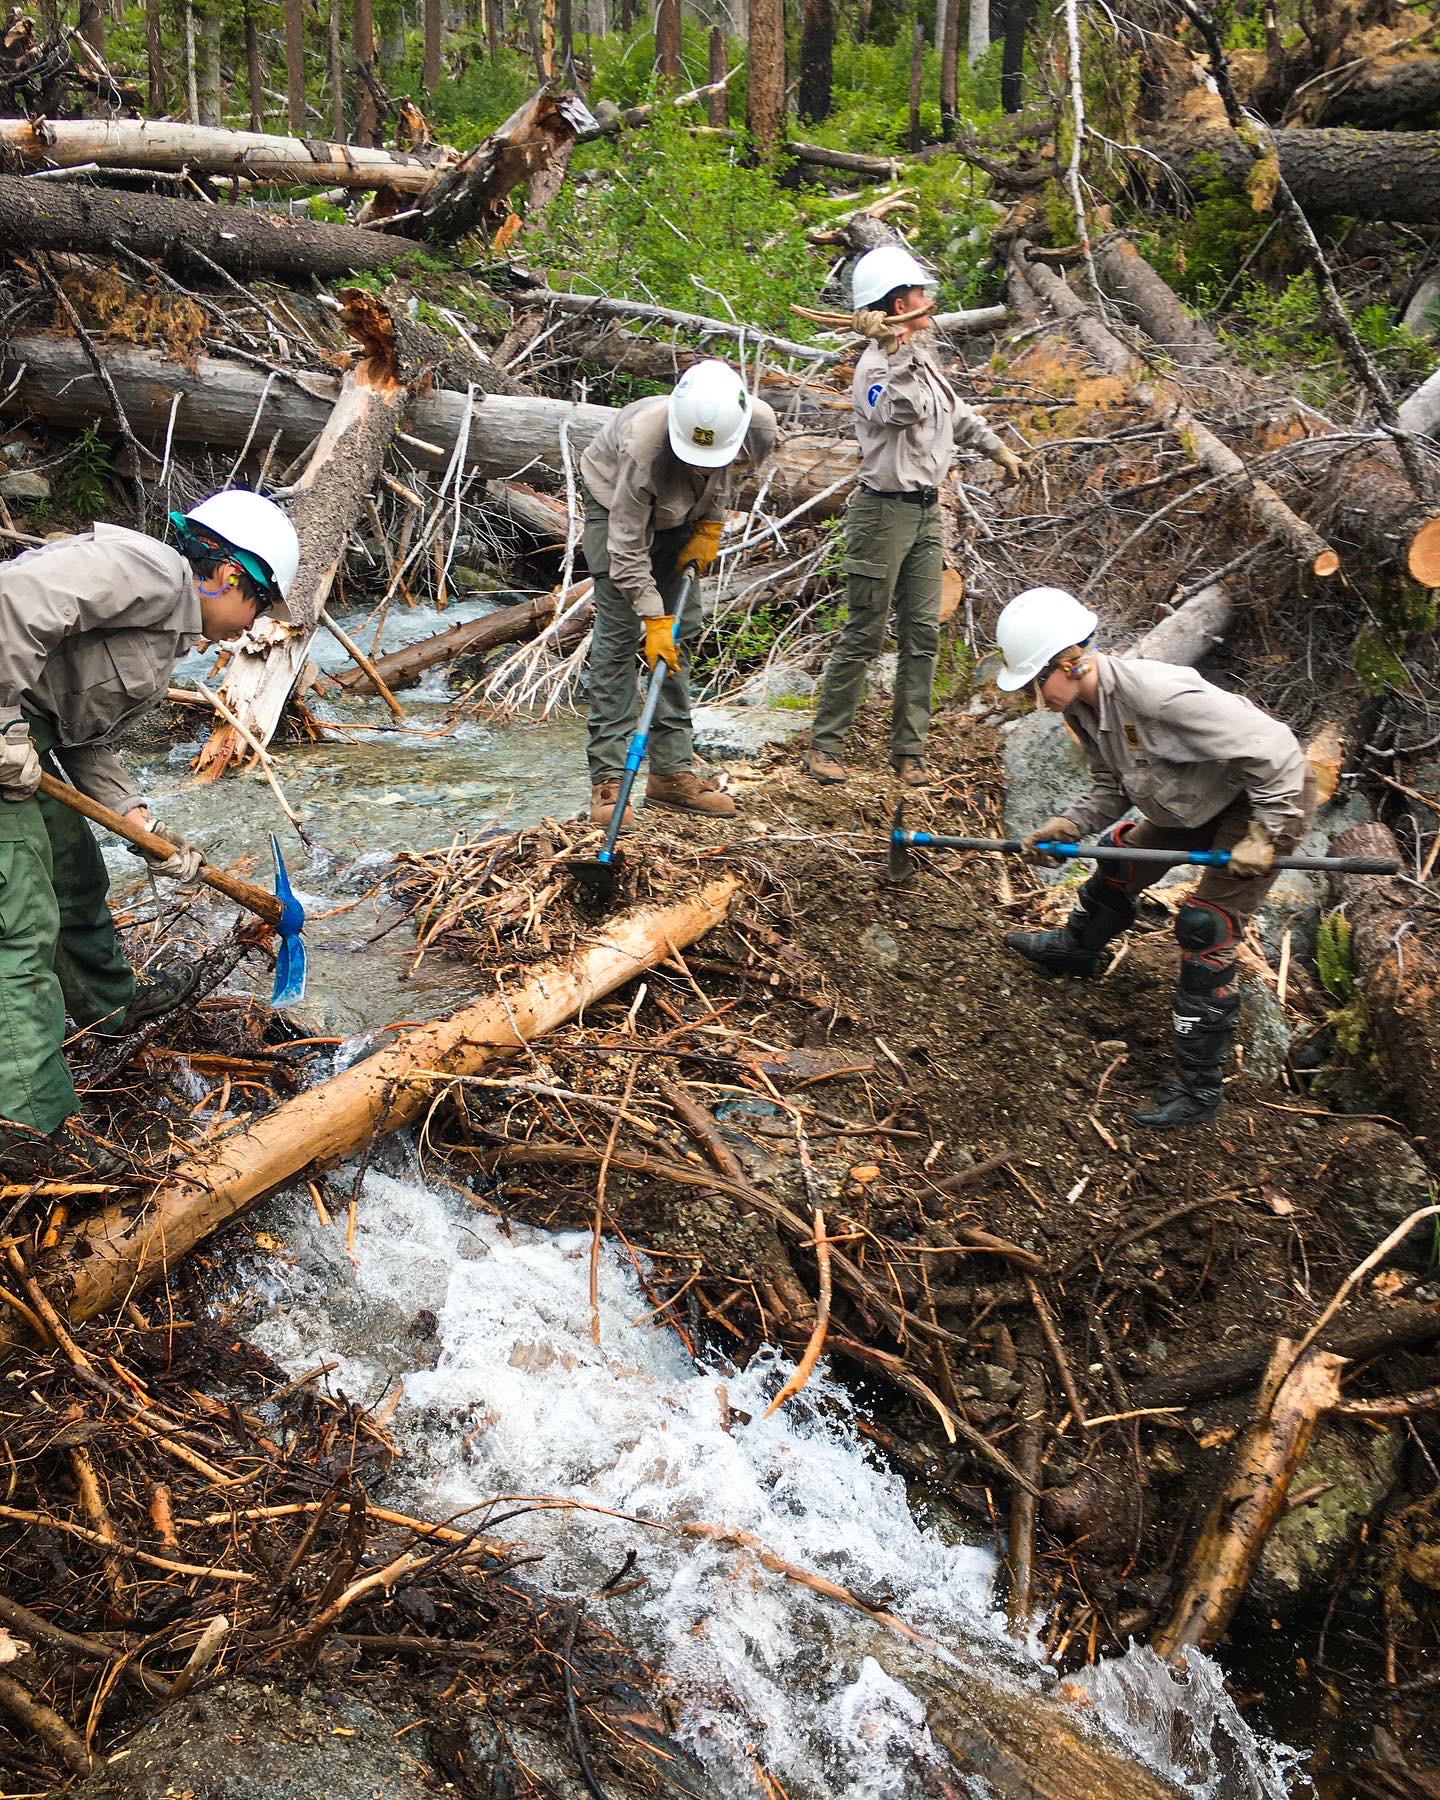 Our trail crew working to clear a blockage to redirect the stream back to its natural flow.